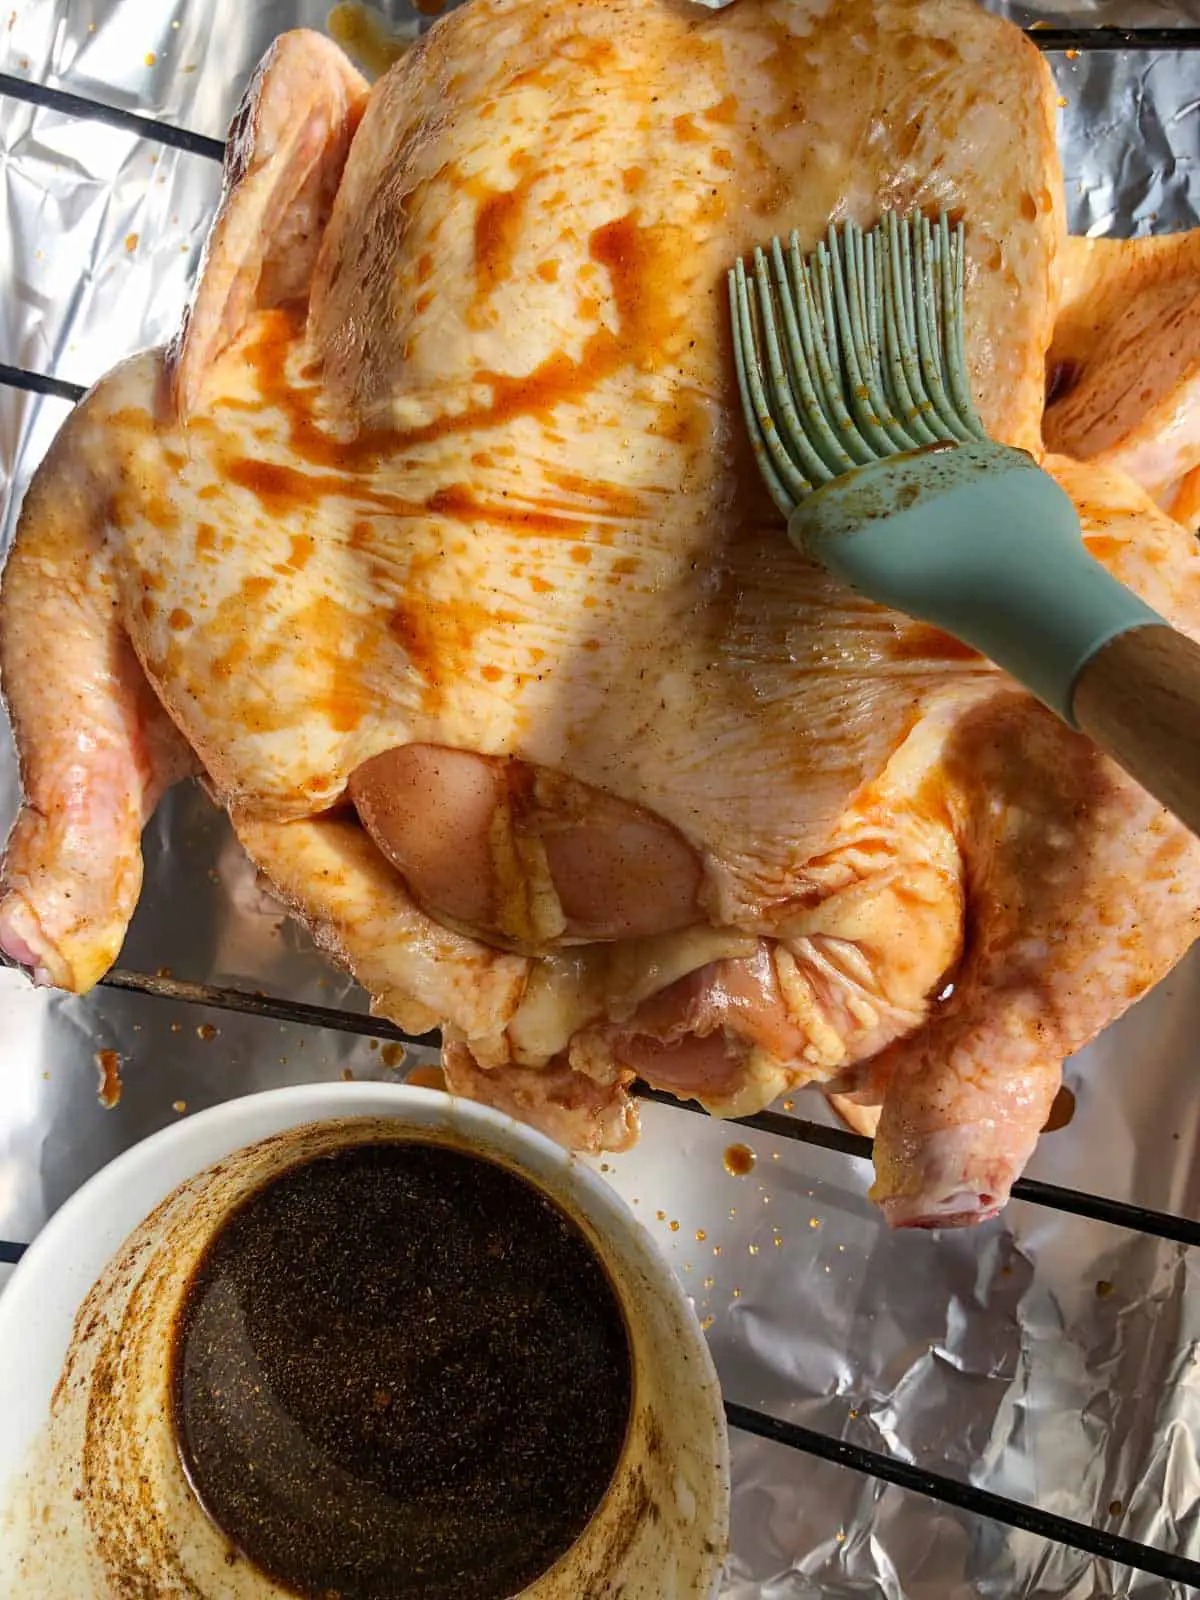 An uncooked whole chicken on a roasting rack with a blue baster basting the chicken with a soy sauce based sauce with Chinese 5 spice and honey and a white bowl containing the sauce next to the chicken.